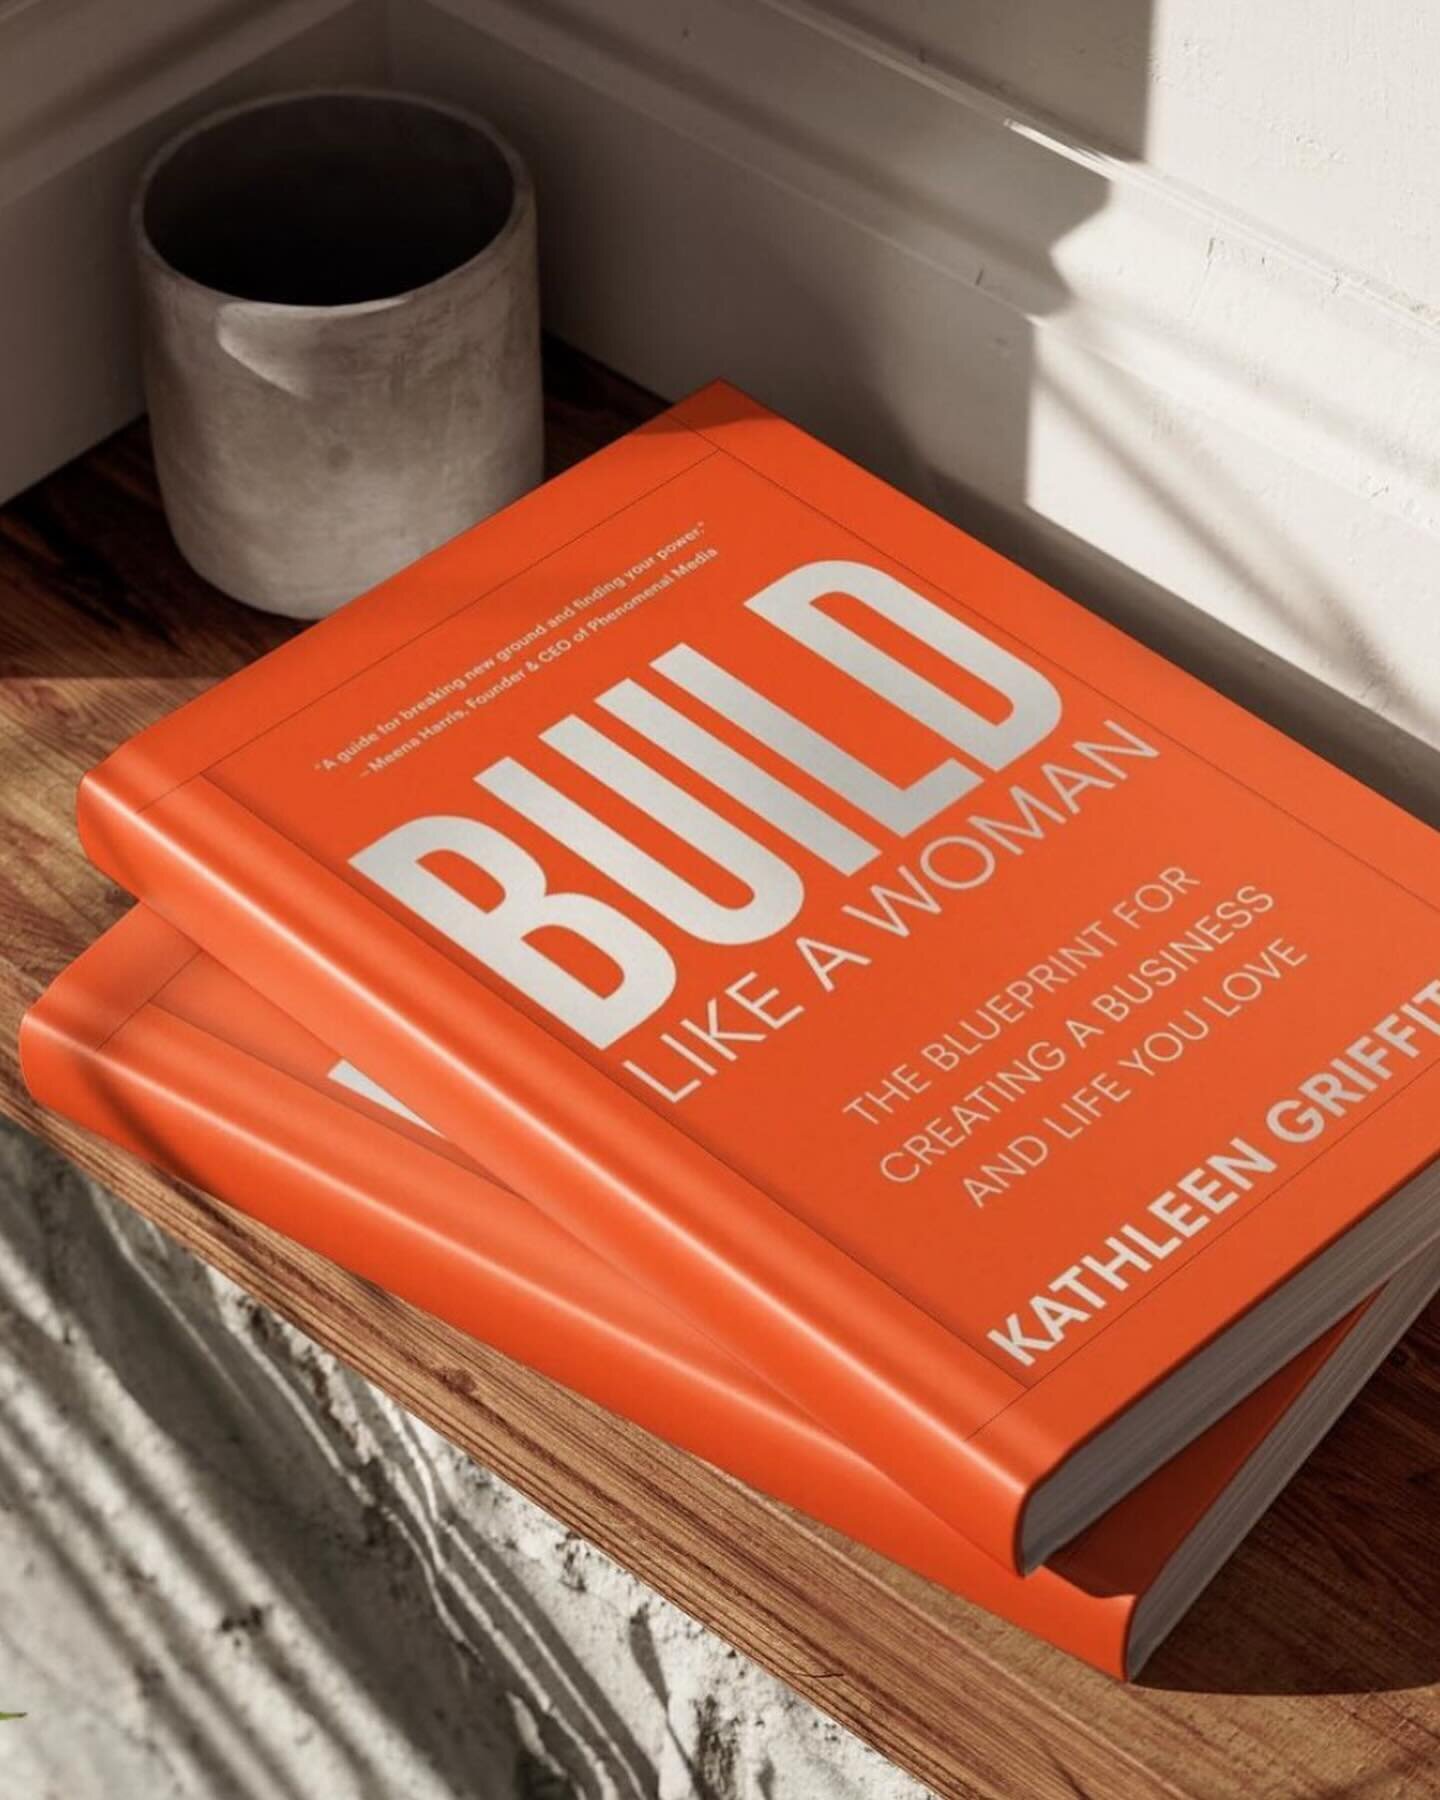 After years of pouring herself into this project I&rsquo;m teary-eyed that we can finally share @kathleengrayce book with you TODAY! 
Please meet Build Like A Woman: The Blueprint For Creating A Business and Life You Love. This book is extremely hard